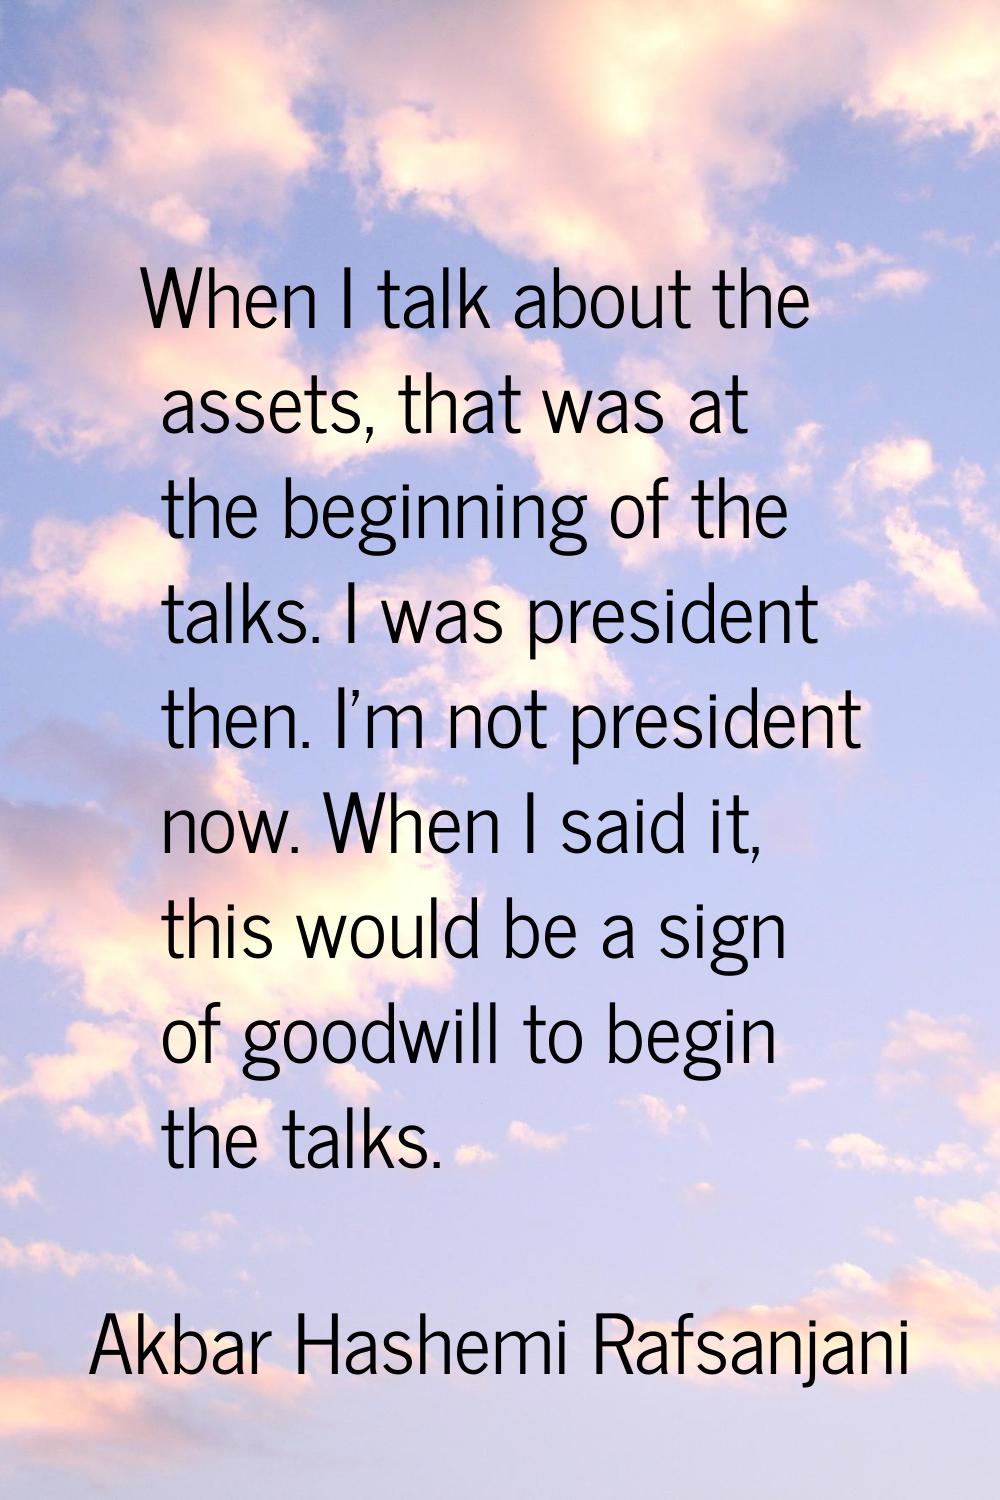 When I talk about the assets, that was at the beginning of the talks. I was president then. I'm not